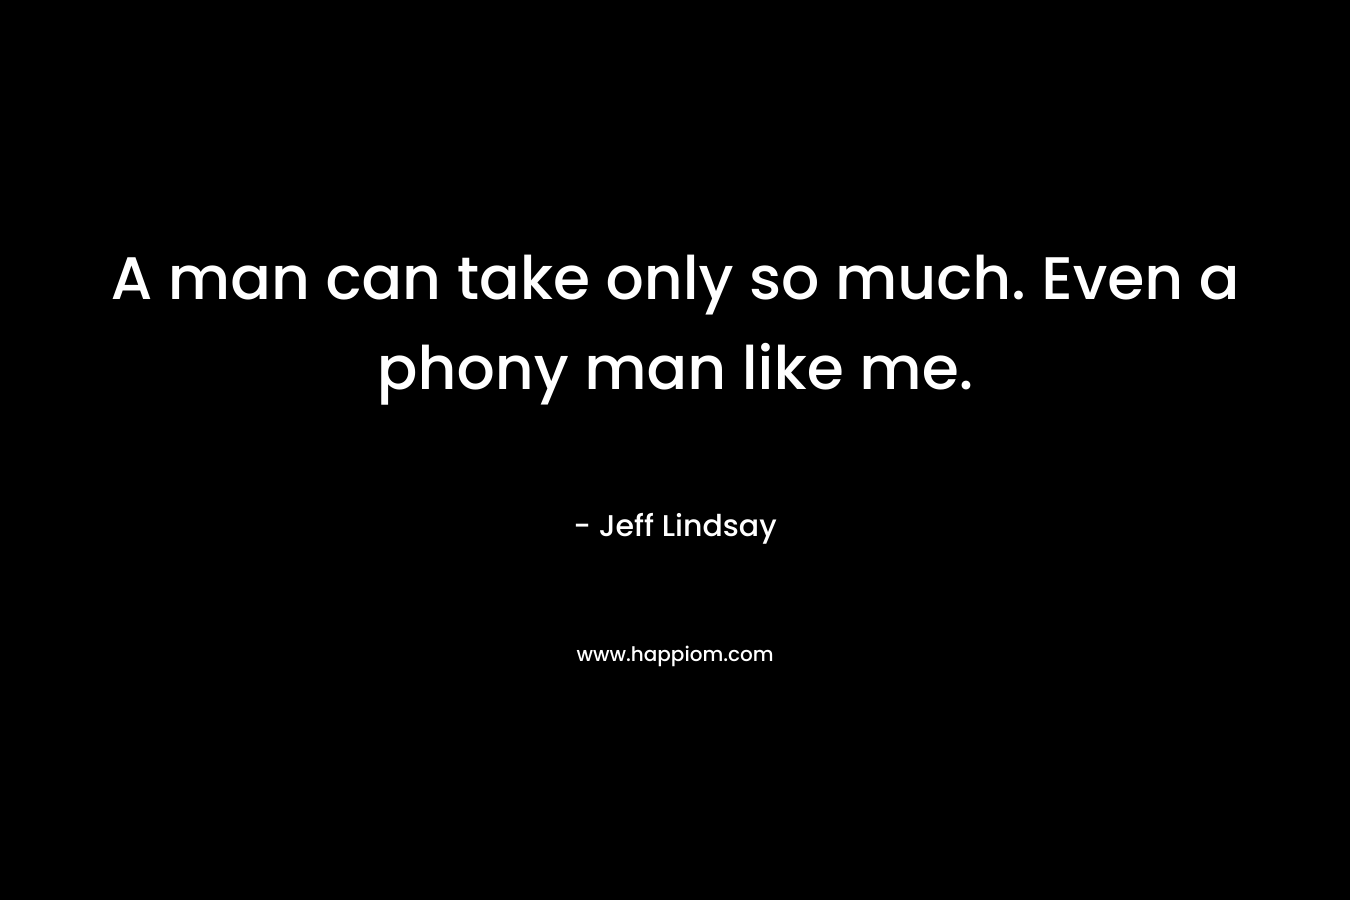 A man can take only so much. Even a phony man like me. – Jeff Lindsay